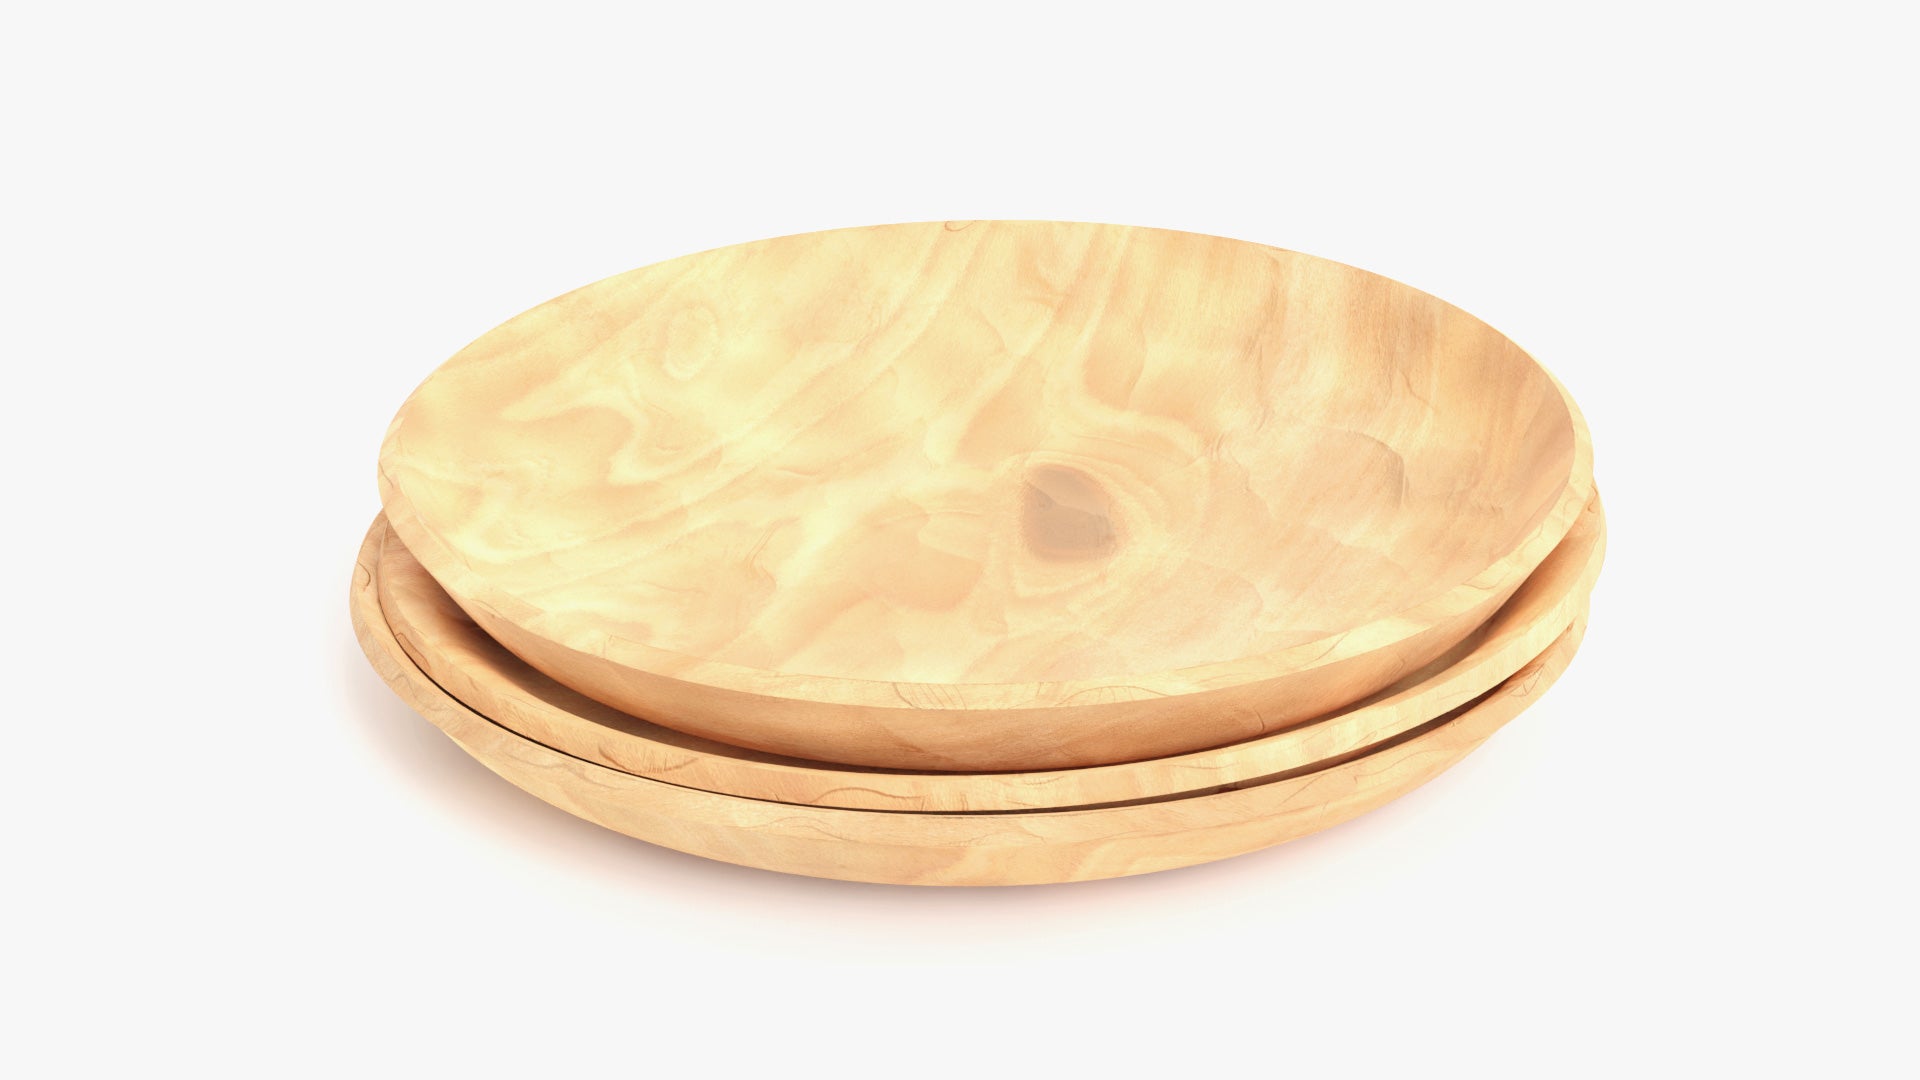 3D model of three wooden plates stacked, made of carved light wood. They have low polycount and PBR textures, and look extremely realistic